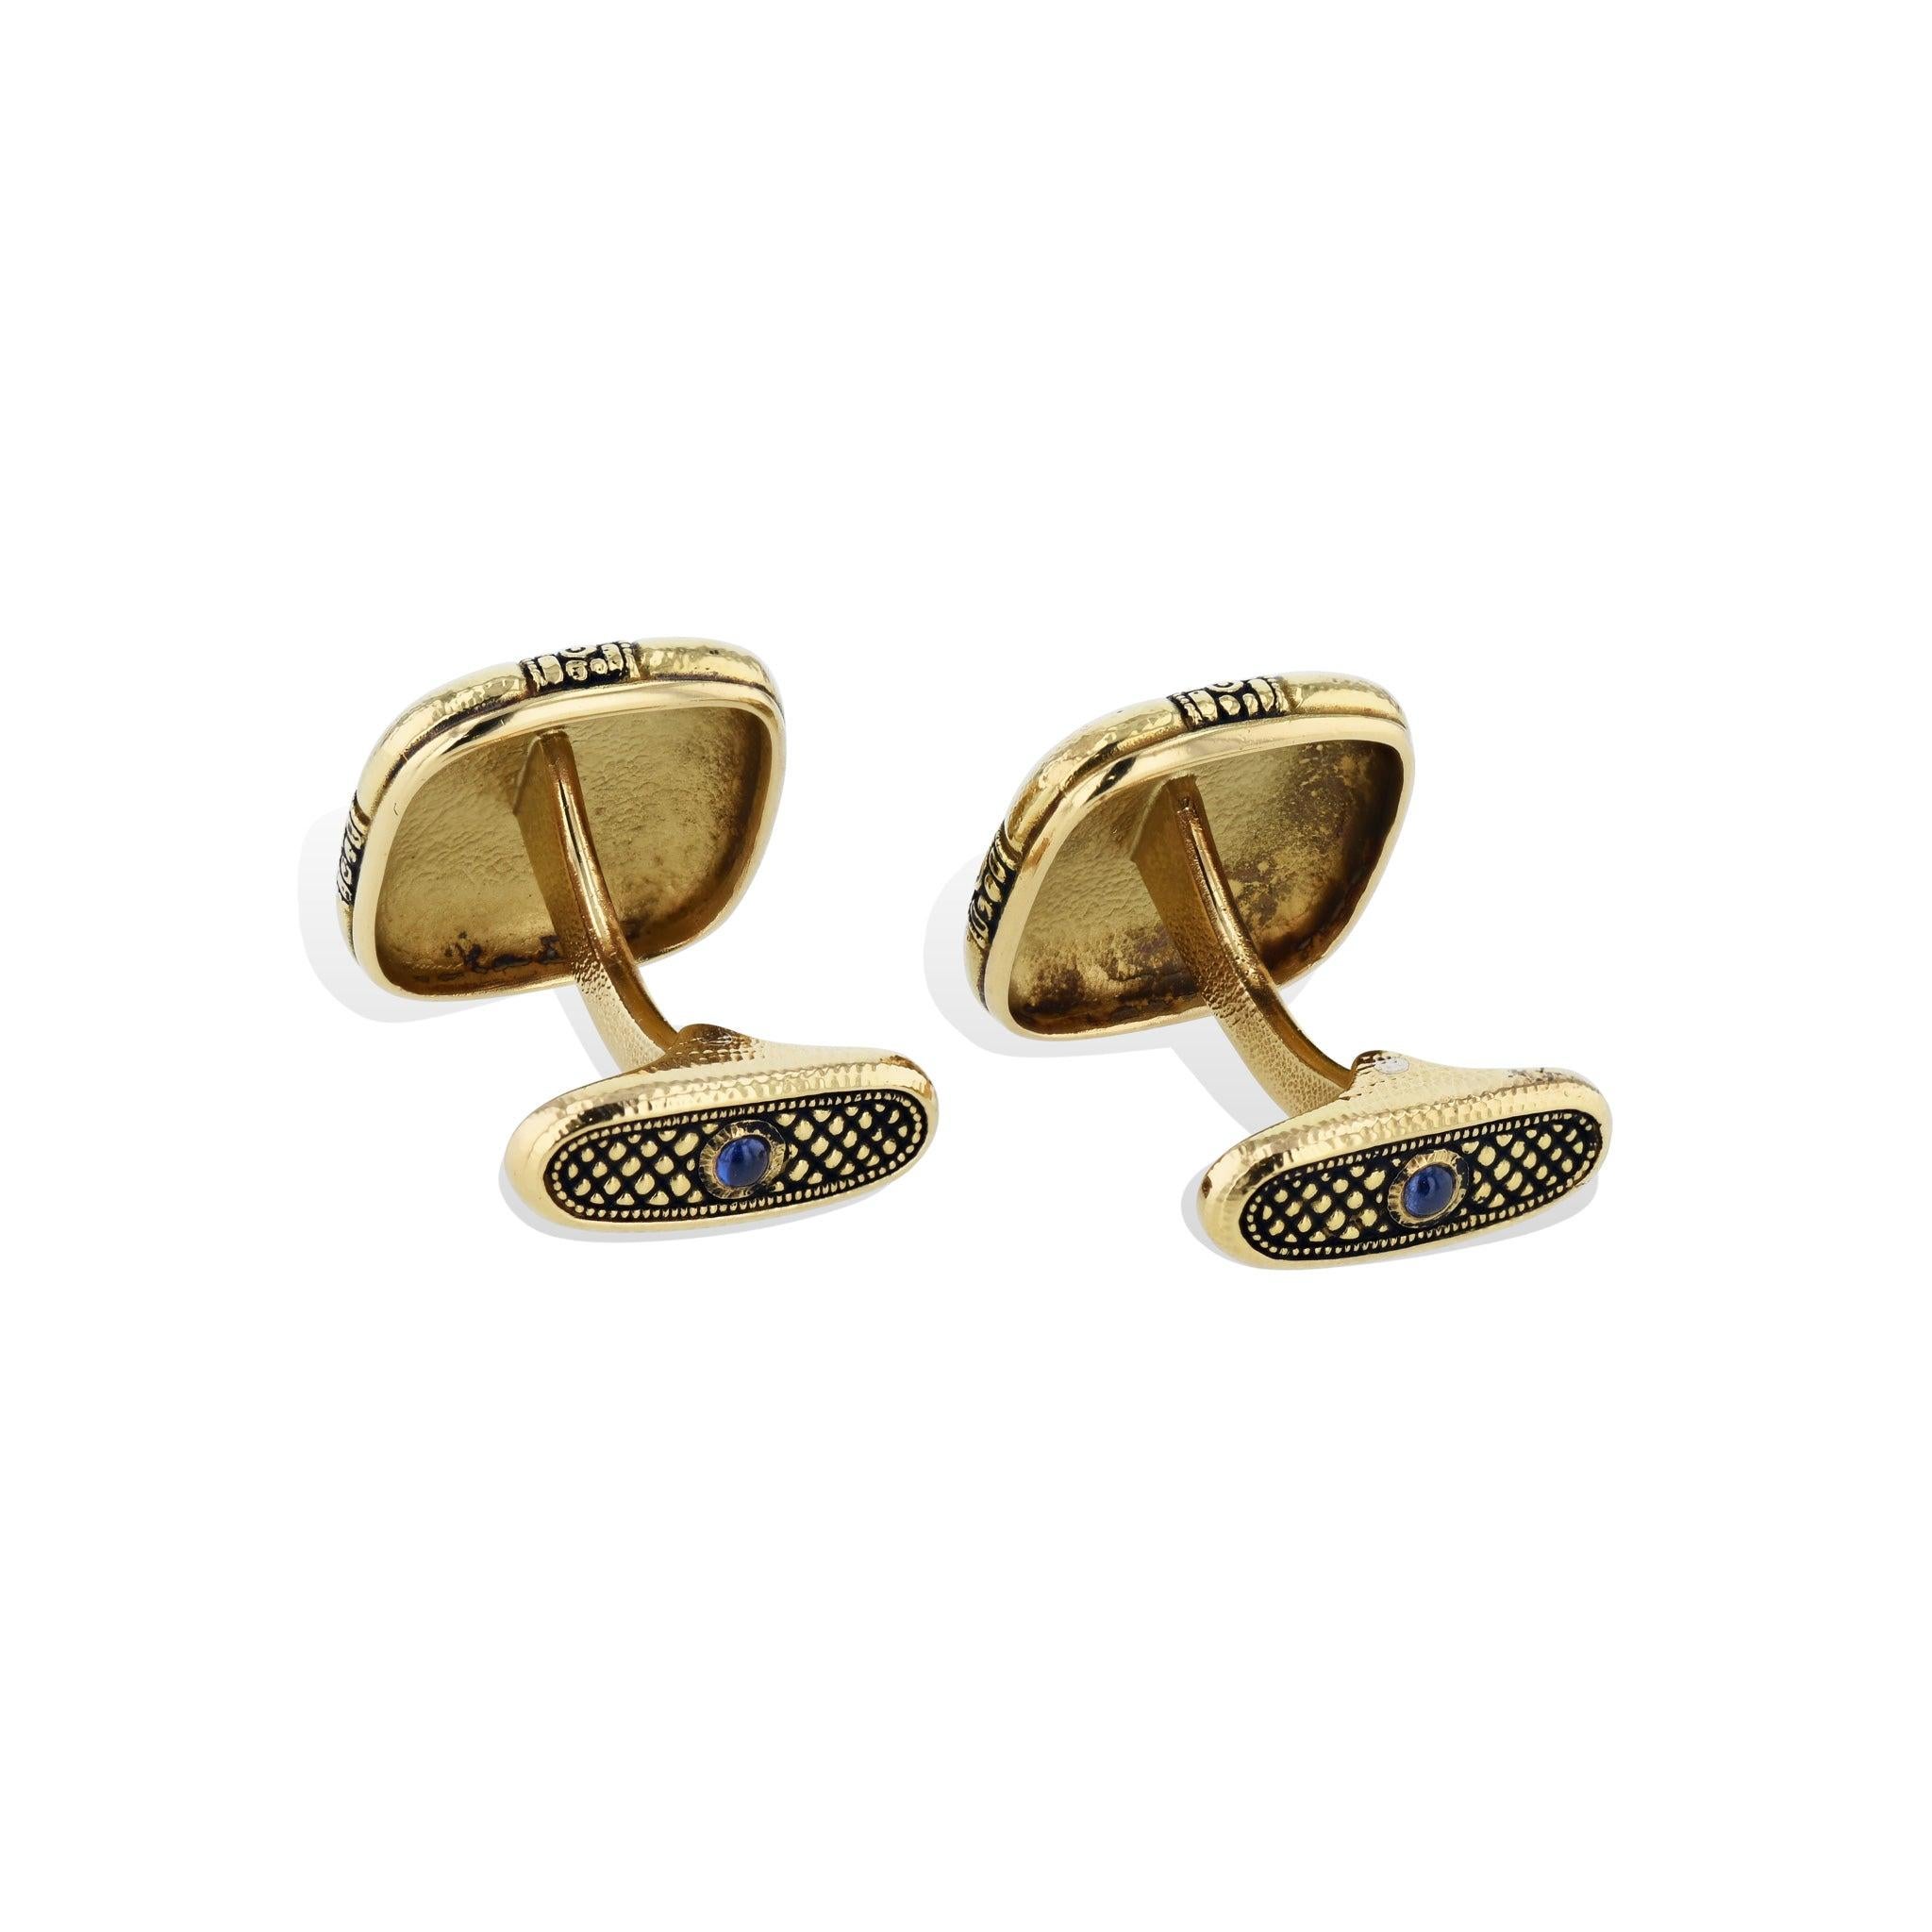 Unlock timeless luxury with these daring Alex Sepkus 18kt. Yellow Gold Ribbon Cufflinks Featuring stunning Blue Sapphire cabochons from the H&H esteemed Estate Collection. For those who appreciate a timeless classic, these cufflinks are an opulent